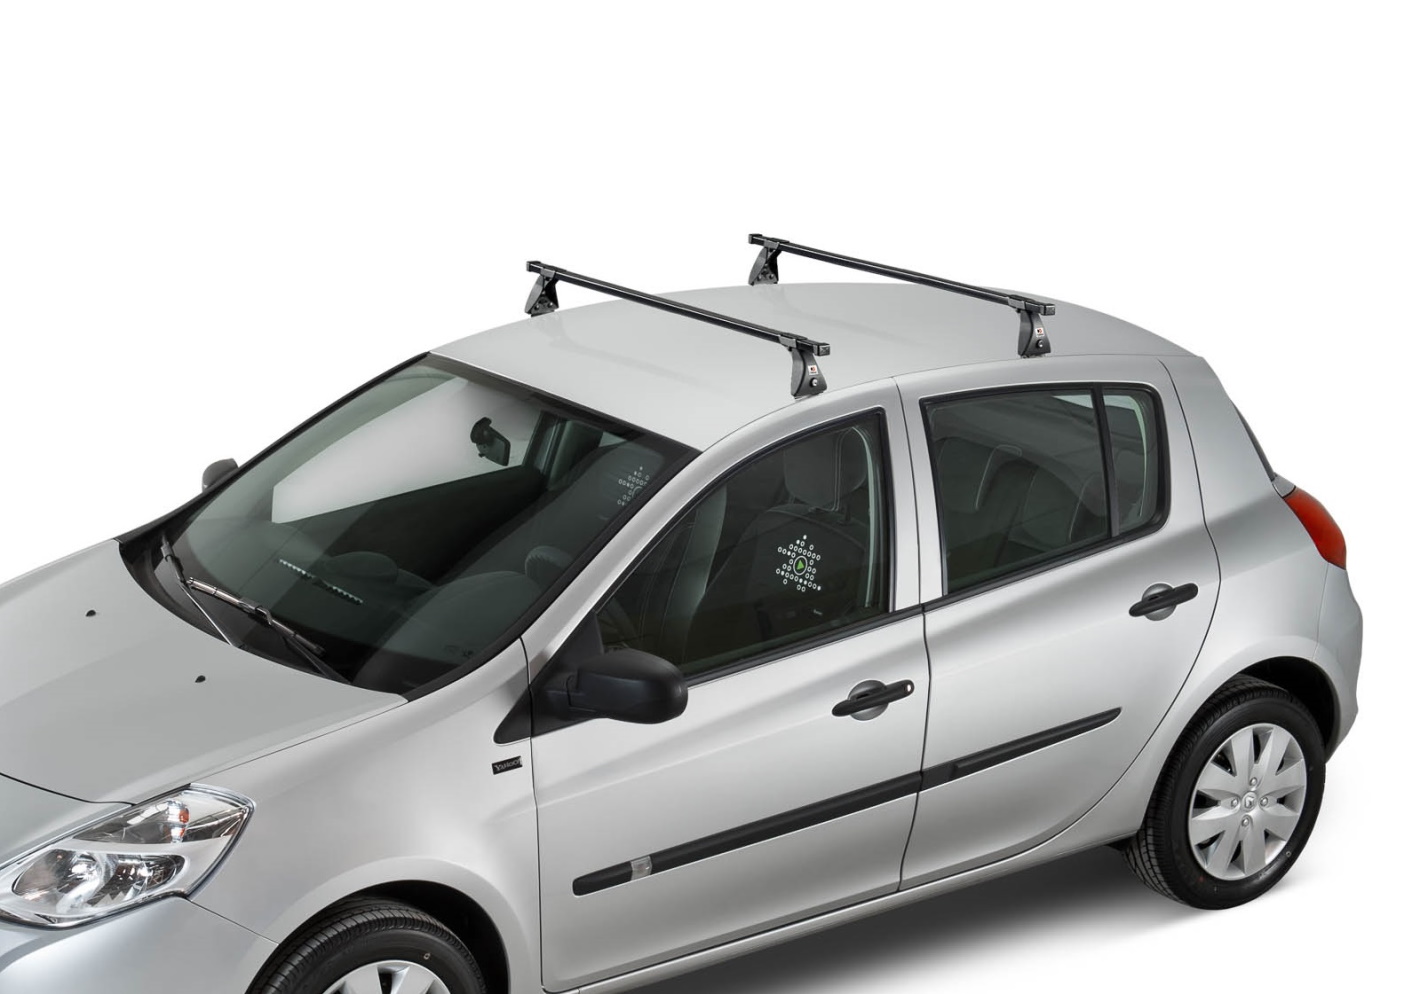 Ford Focus three door (2004 to 2008):FIRRAK 115cm X roof bars with fitting kit 2054